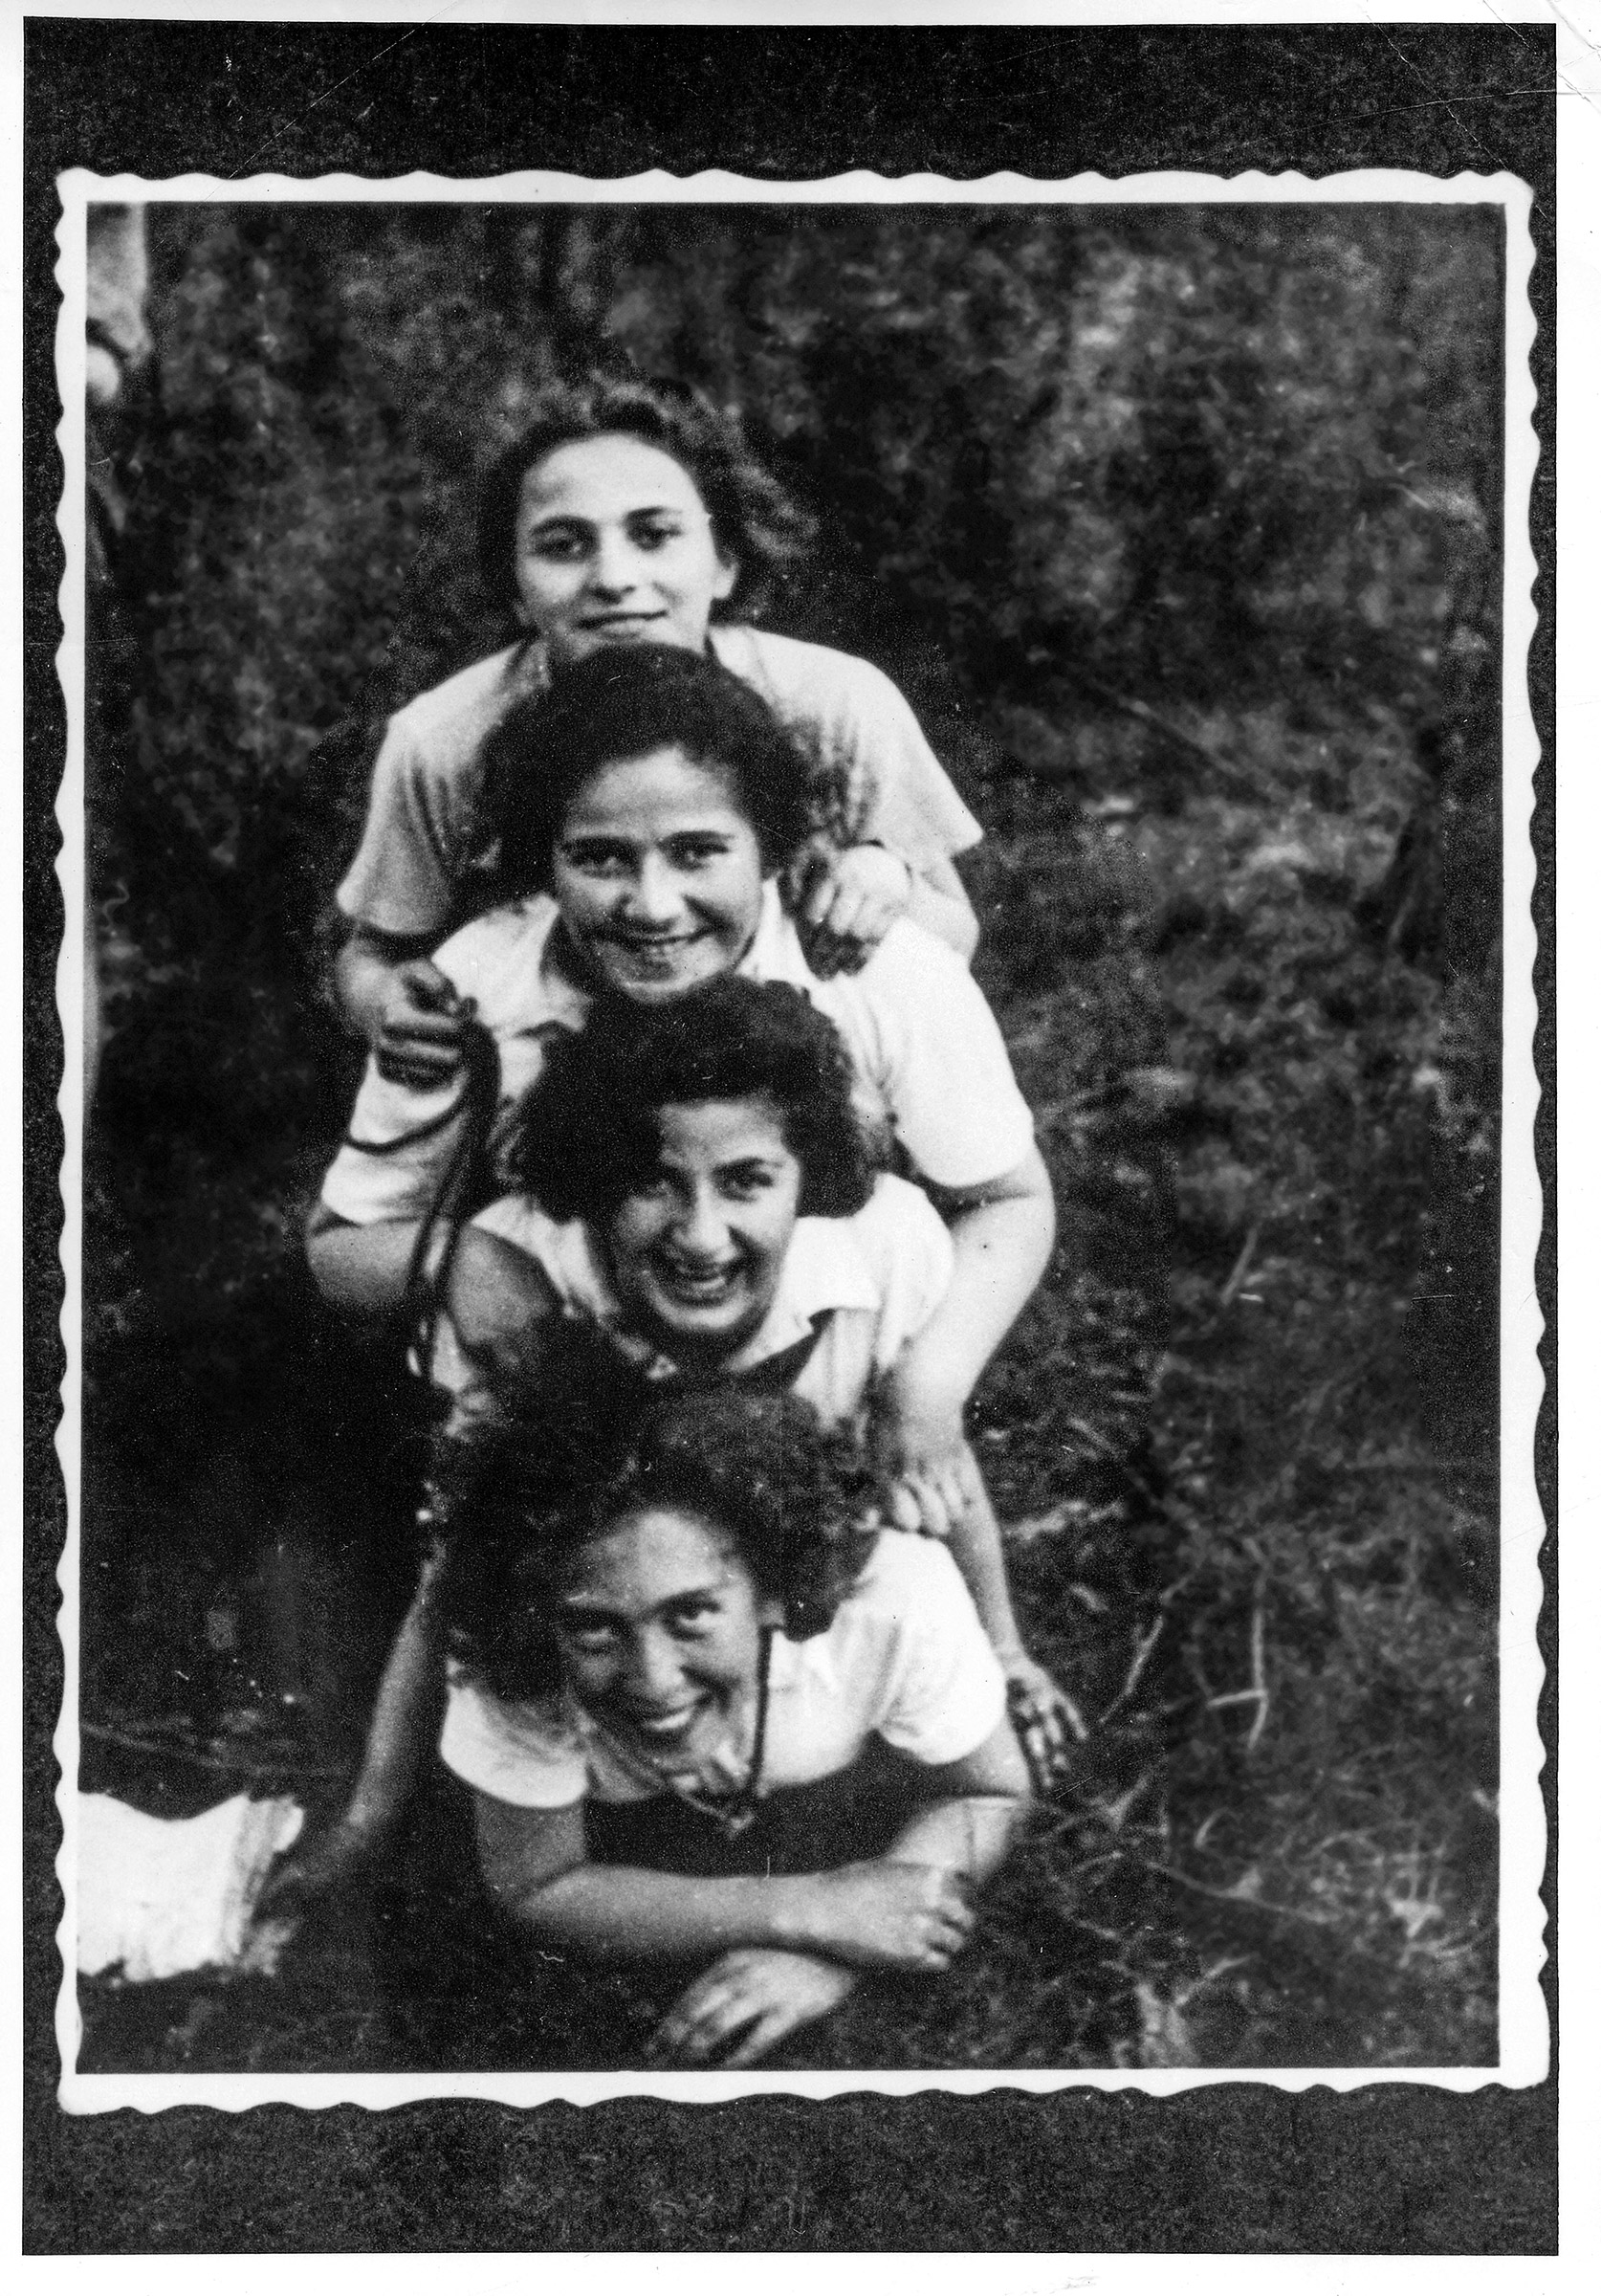 Members of The Young Guard in Włocławek, Poland, during Lag BaOmer, 1937. Tosia Altman is at the bottom. (Courtesy of Yad Vashem Photo Archive, Jerusalem. 1592/1)